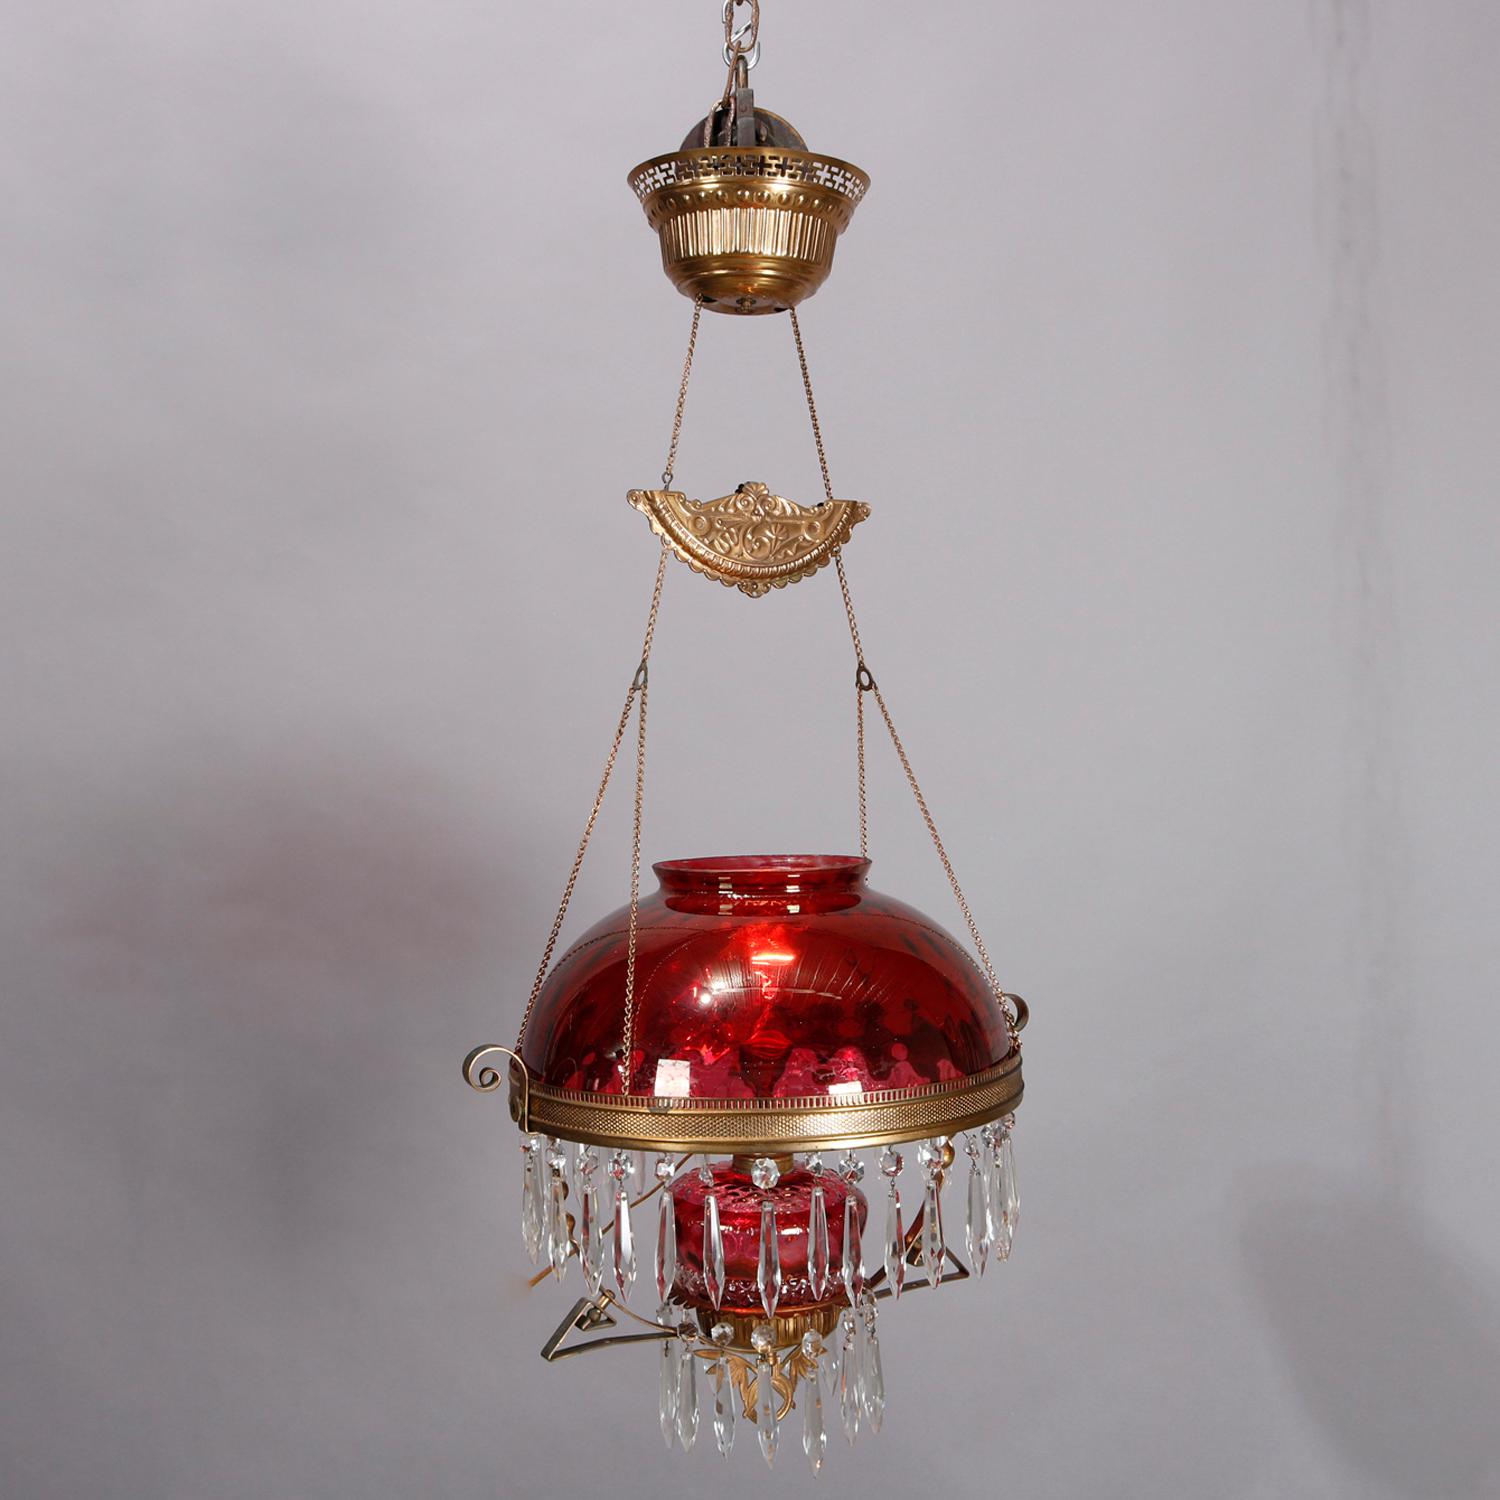 An antique Victorian hanging banquet light offers cranberry glass shade and font in brass frame and having cut crystal prisms, electrified, circa 1890

***DELIVERY NOTICE – Due to COVID-19 we are employing NO-CONTACT PRACTICES in the transfer of